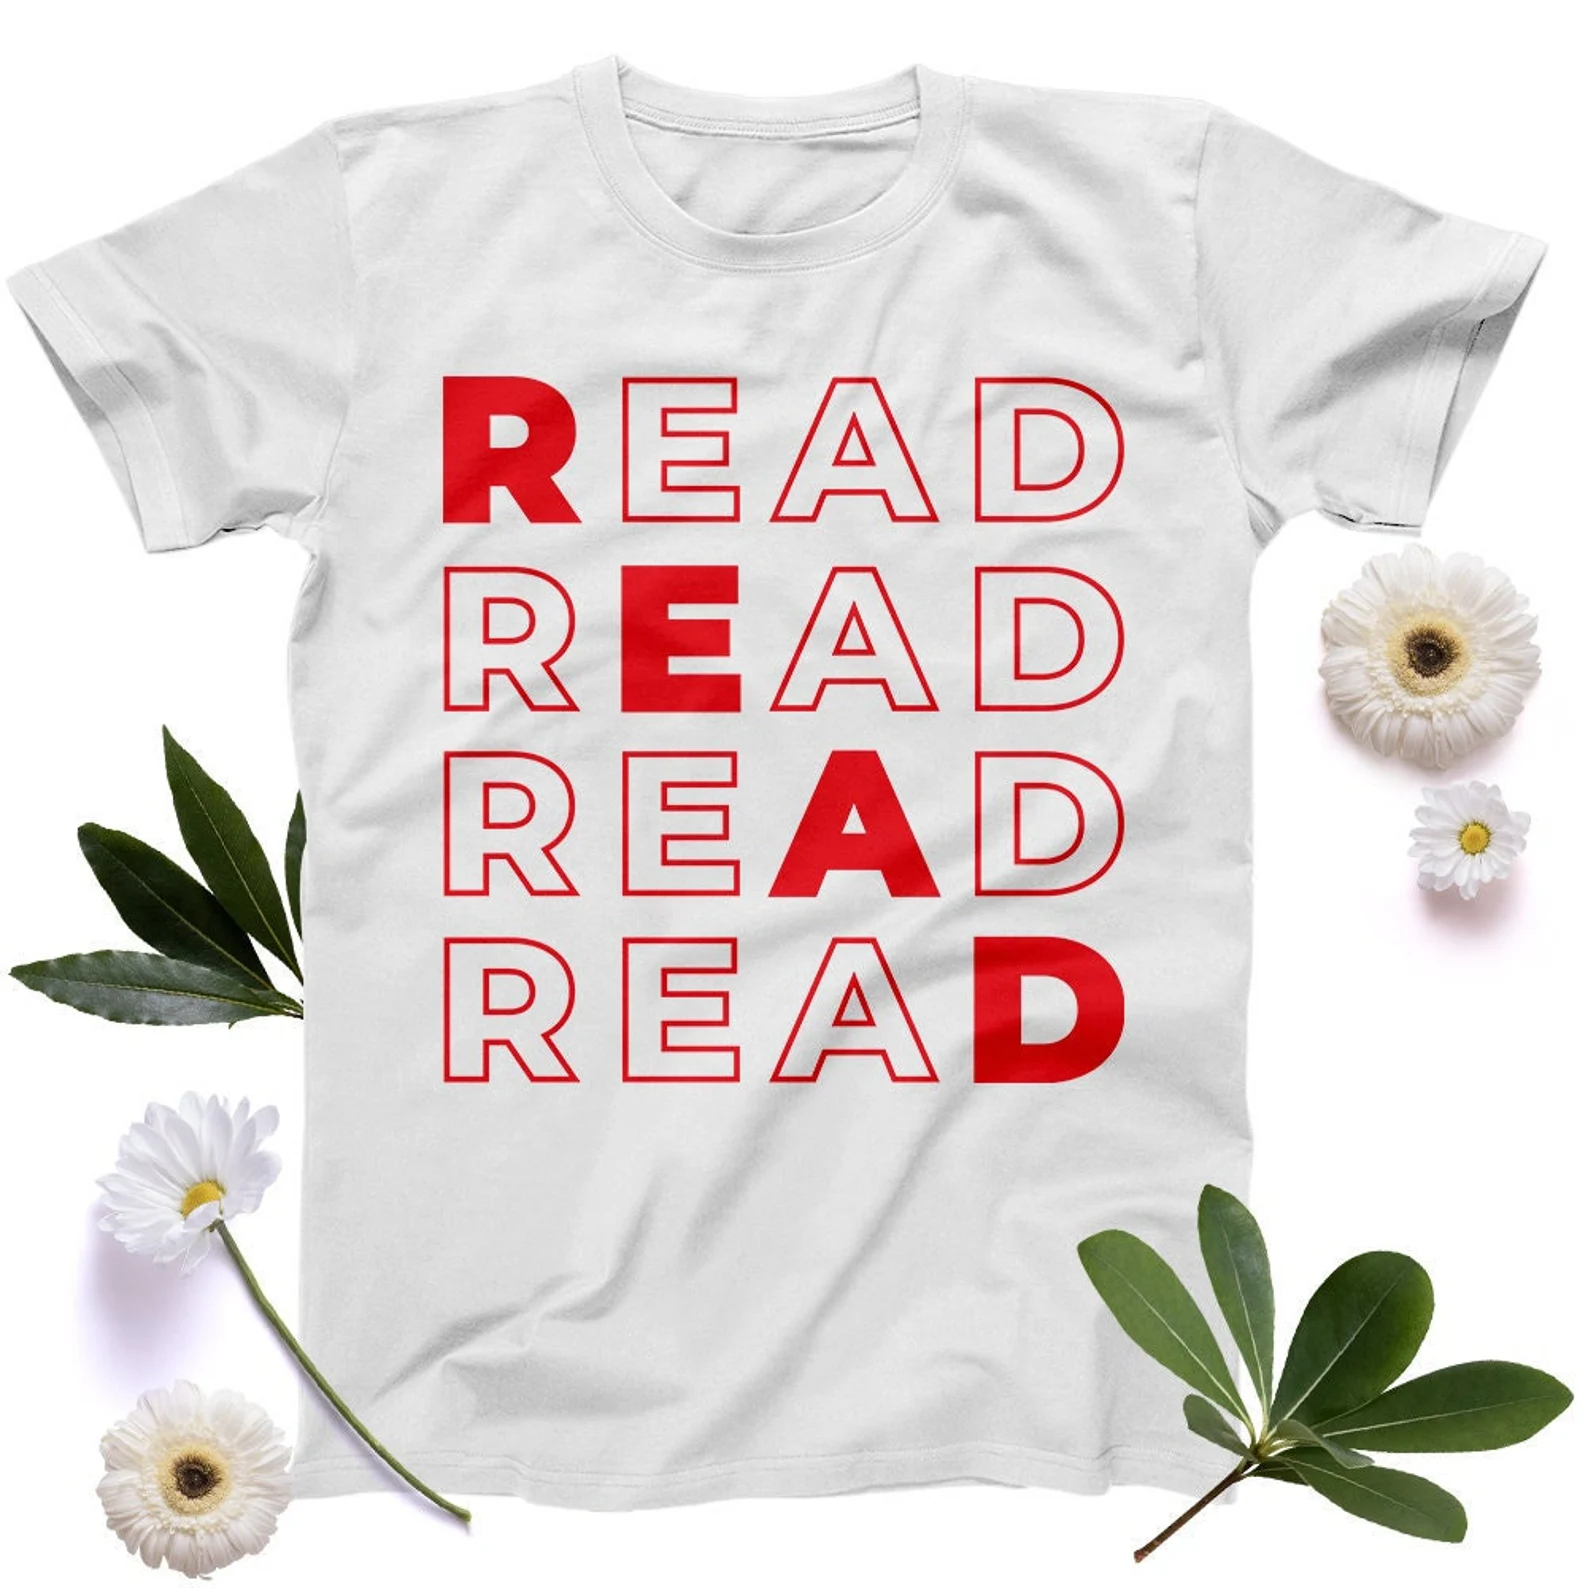 A white t-shirt with red text that says "READ"